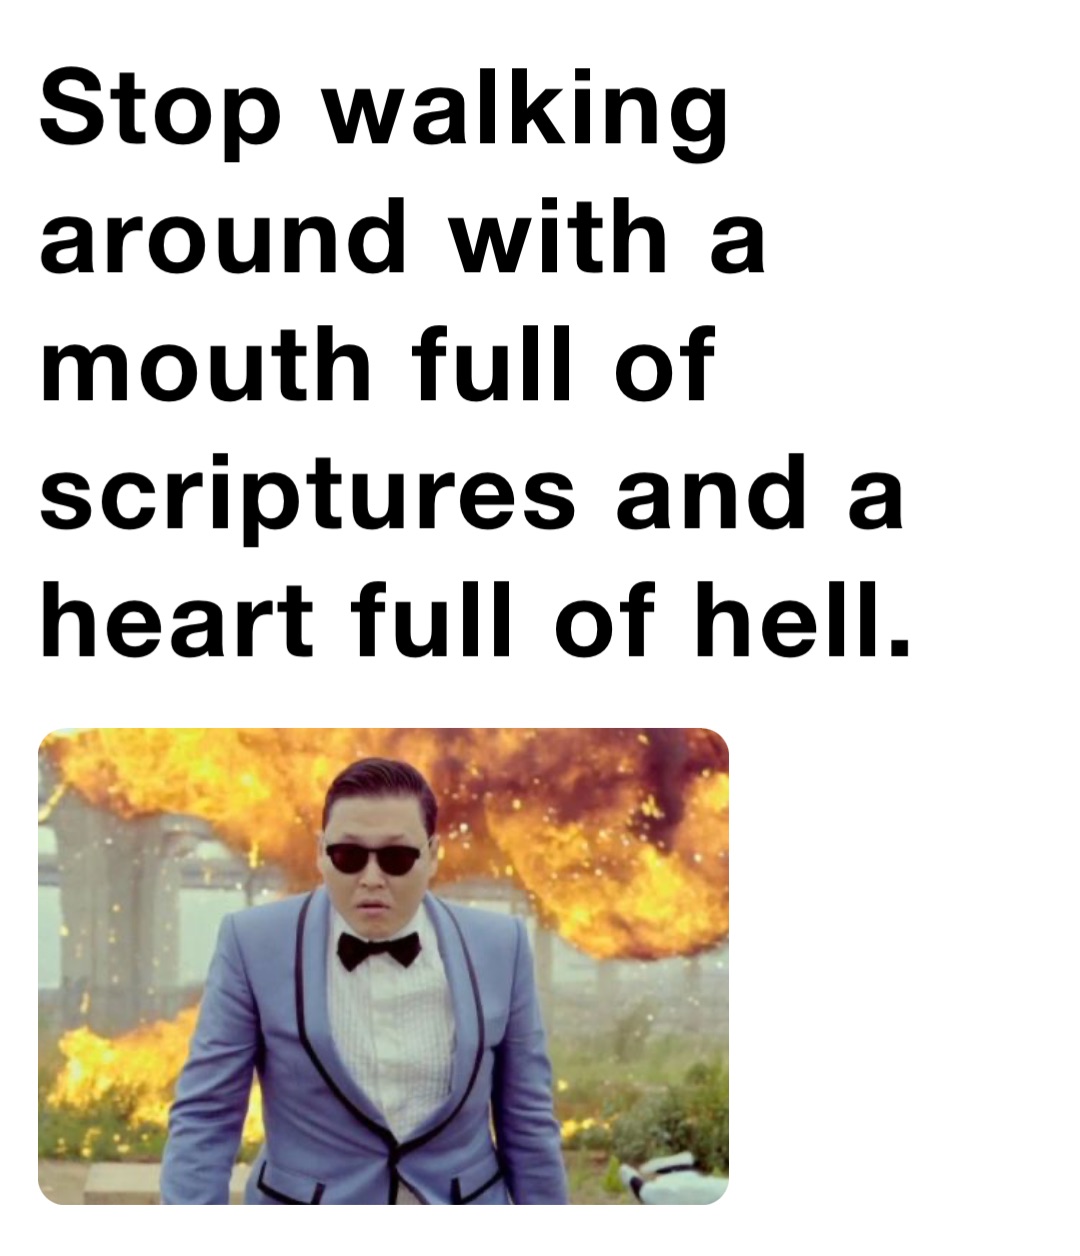 Stop walking around with a mouth full of scriptures and a heart full of hell.